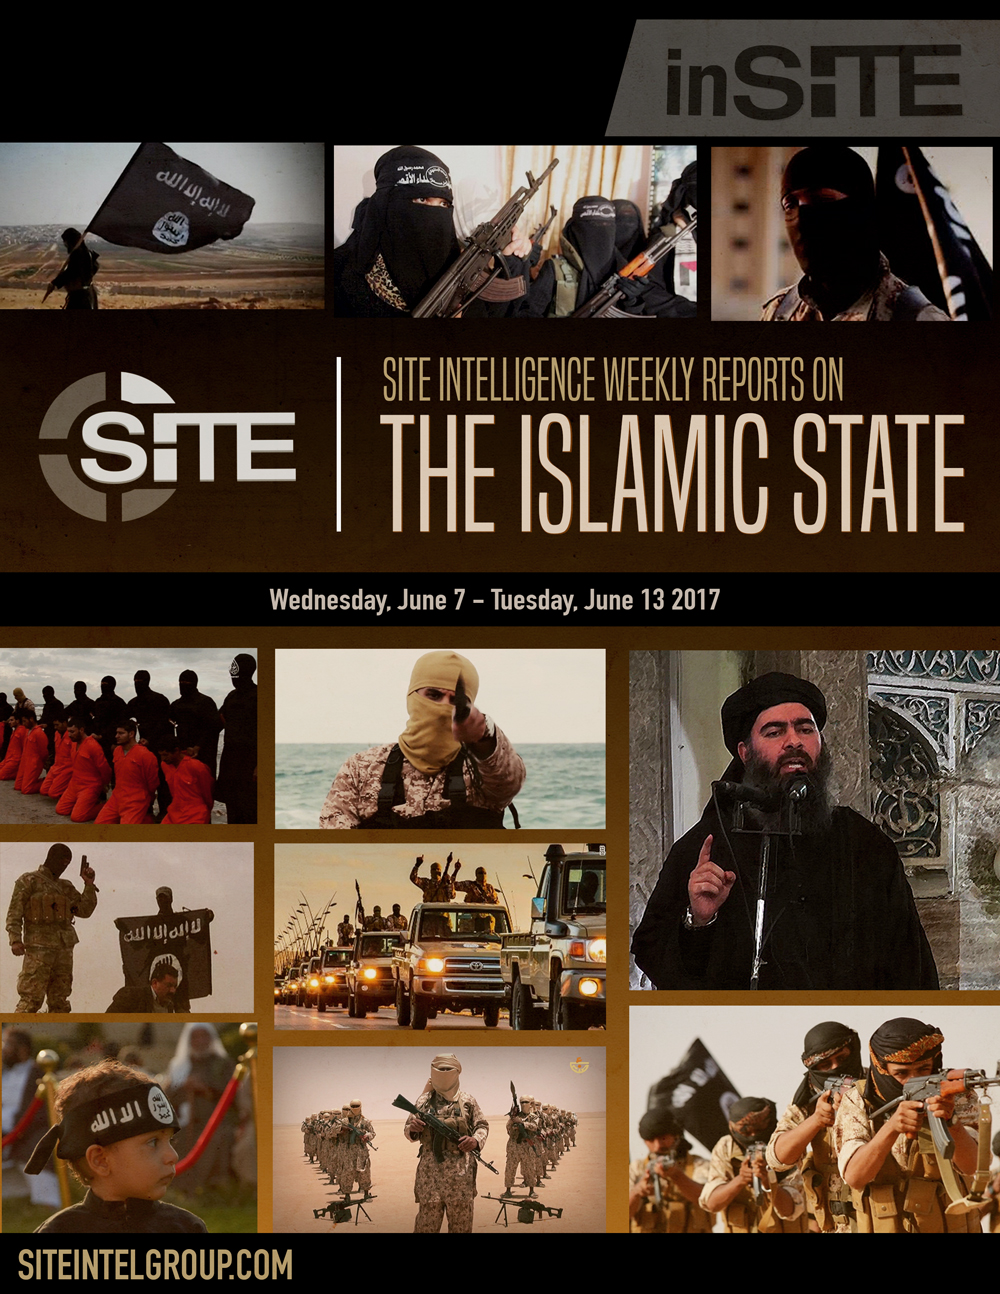 Weekly inSITE on the Islamic State, December 14 - 20, 2016